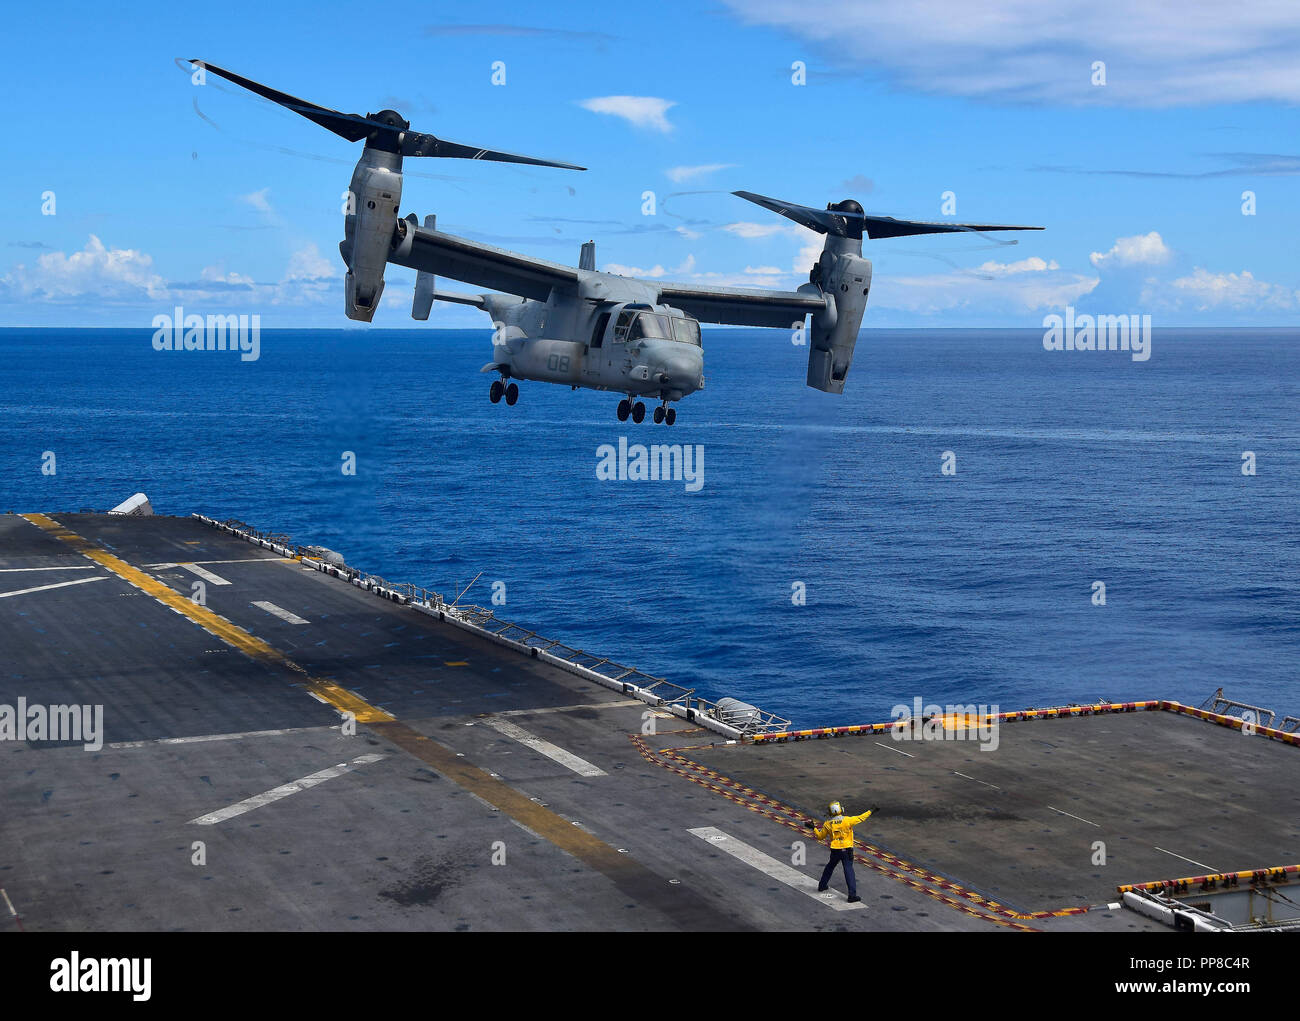 180923-N-RI884-0403 SOUTH CHINA SEA (Sept. 23, 2018) - An MV-22B Osprey tiltrotor aircraft assigned to the “Flying Tigers” of Marine Medium Tiltrotor Squadron (VMM) 262, reinforced, takes off from the amphibious assault ship USS Wasp (LHD 1) during flight operations. Wasp, flagship of the Wasp Amphibious Ready Group, with embarked 31st Marine Expeditionary Unit, is operating in the Indo-Pacific region to enhance interoperability with partners and serve as a ready-response force for any type of contingency. (U.S. Navy photo by Mass Communication Specialist 1st Class Daniel Barker) Stock Photo